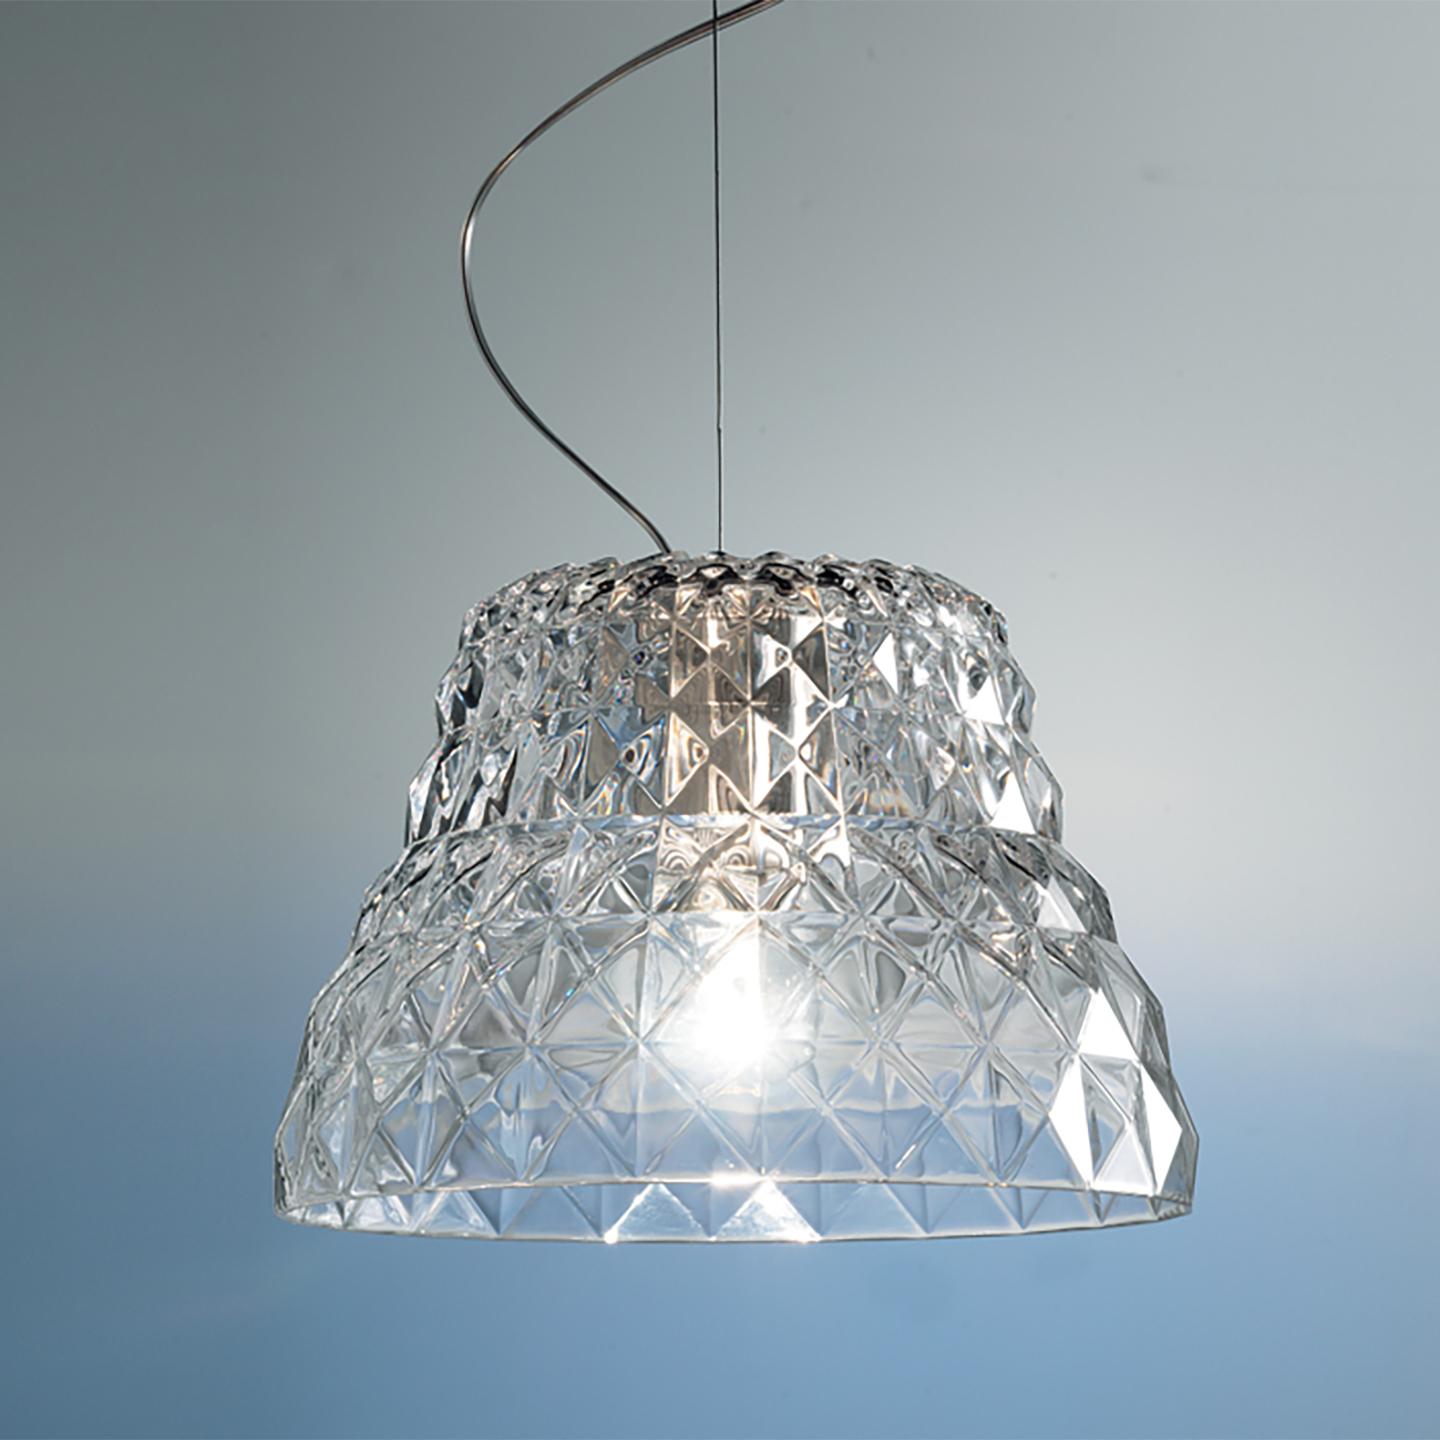 The Atelier pendant, designed by Archirivolto, is an elegant bowl of crystal that dazzles and sparkles. Atelier, which means “workshop” in English, features beautiful, handmade cut crystal that hangs gracefully from the ceiling. The extraordinary